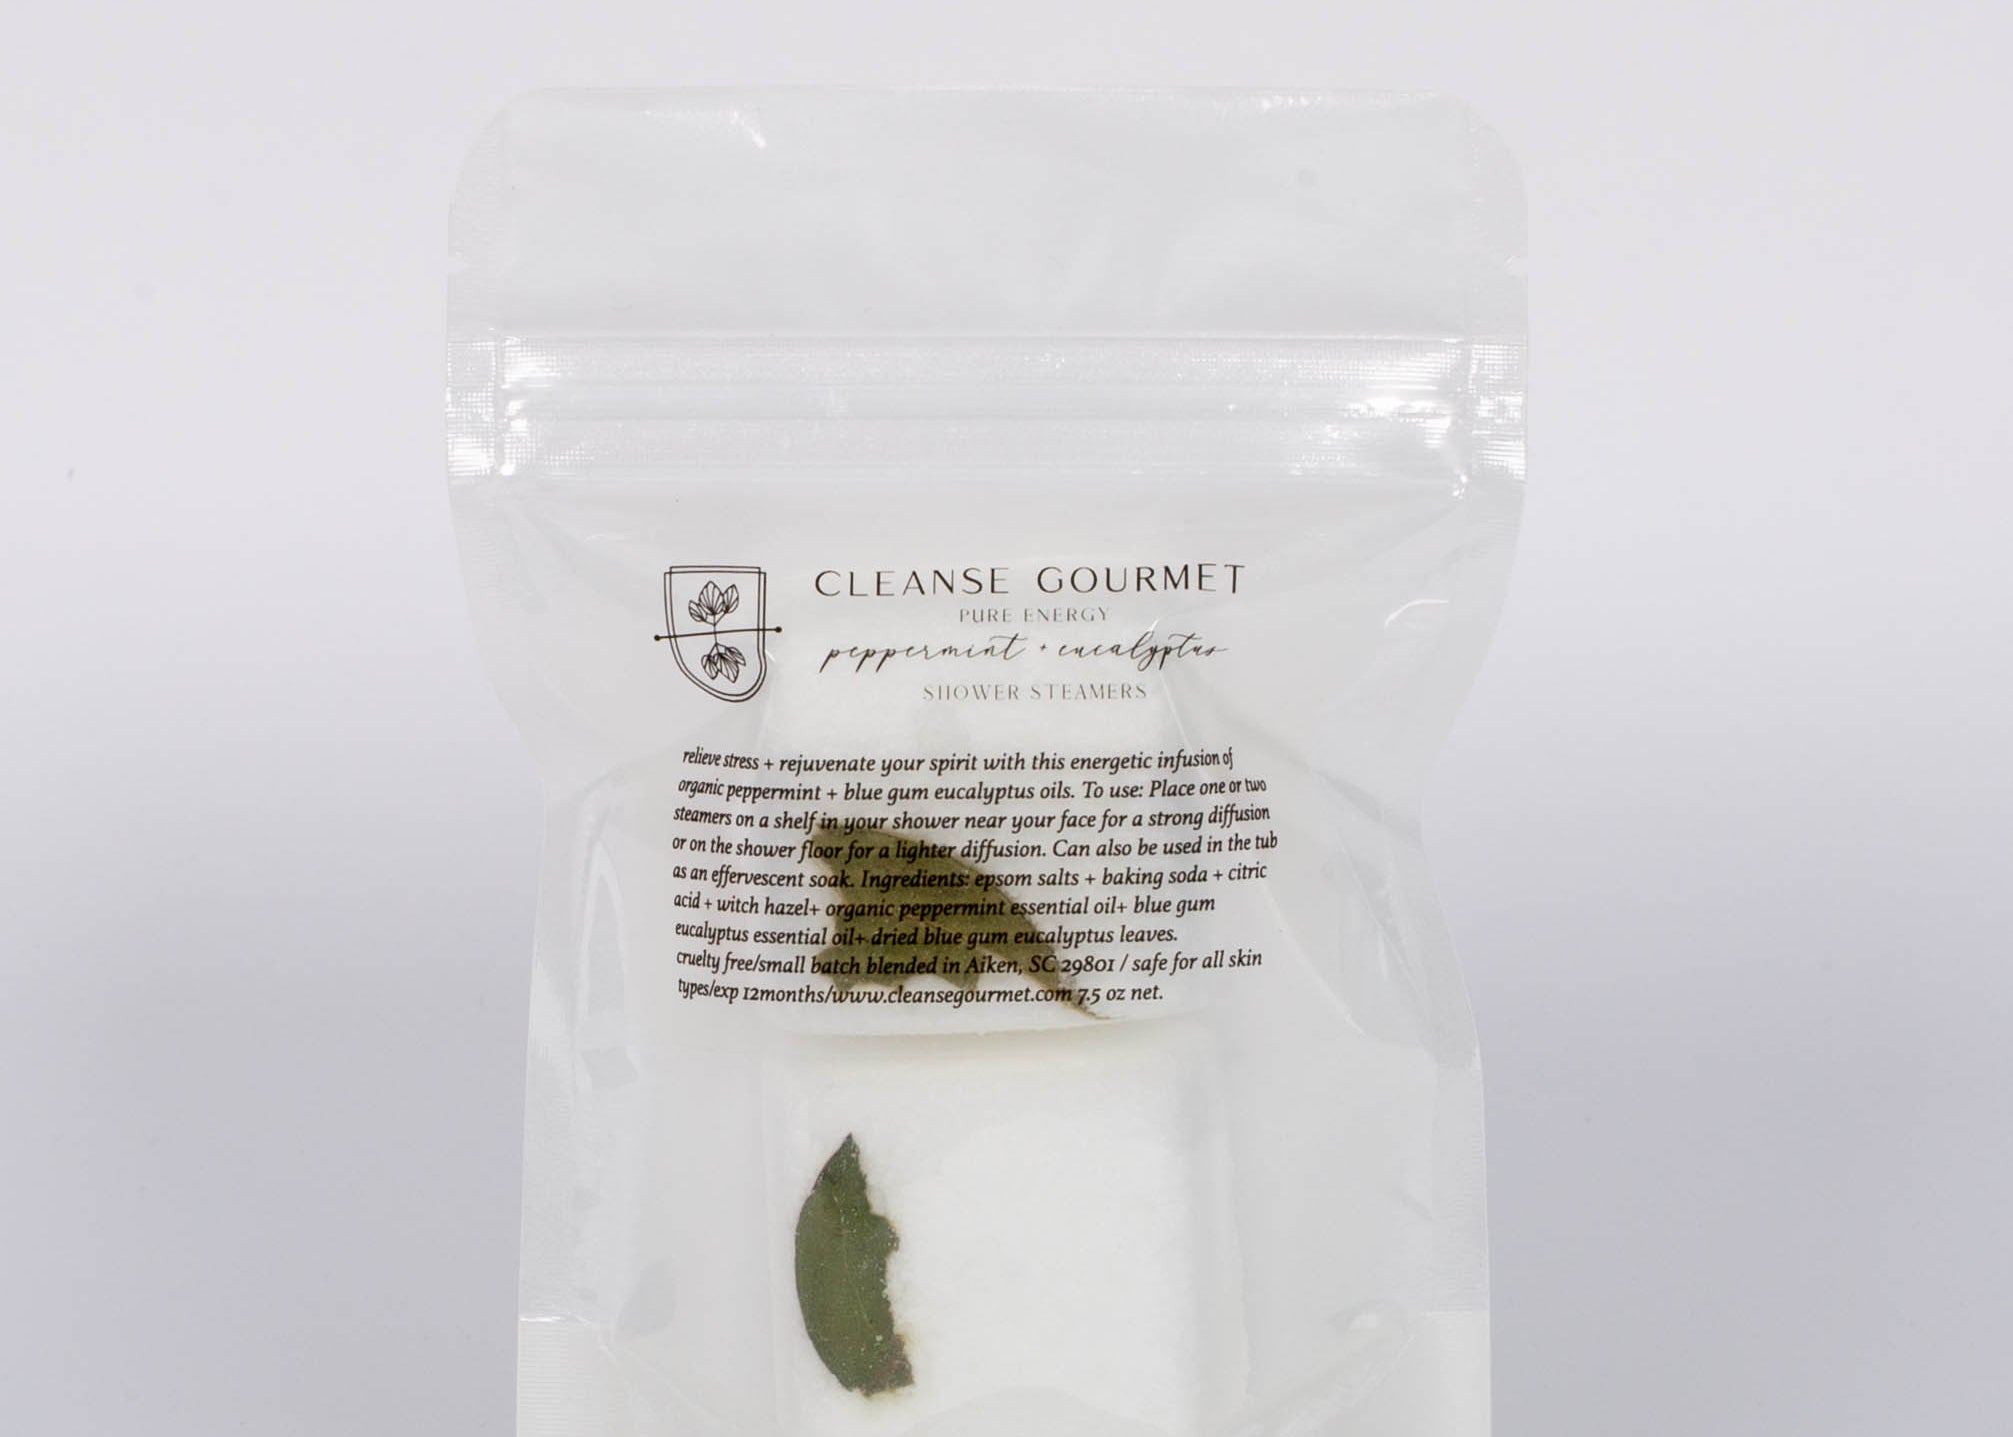 Pack of two pure Energy Eucalyptus + Peppermint Shower Steamers with essential oils by Cleanse Gourmet.